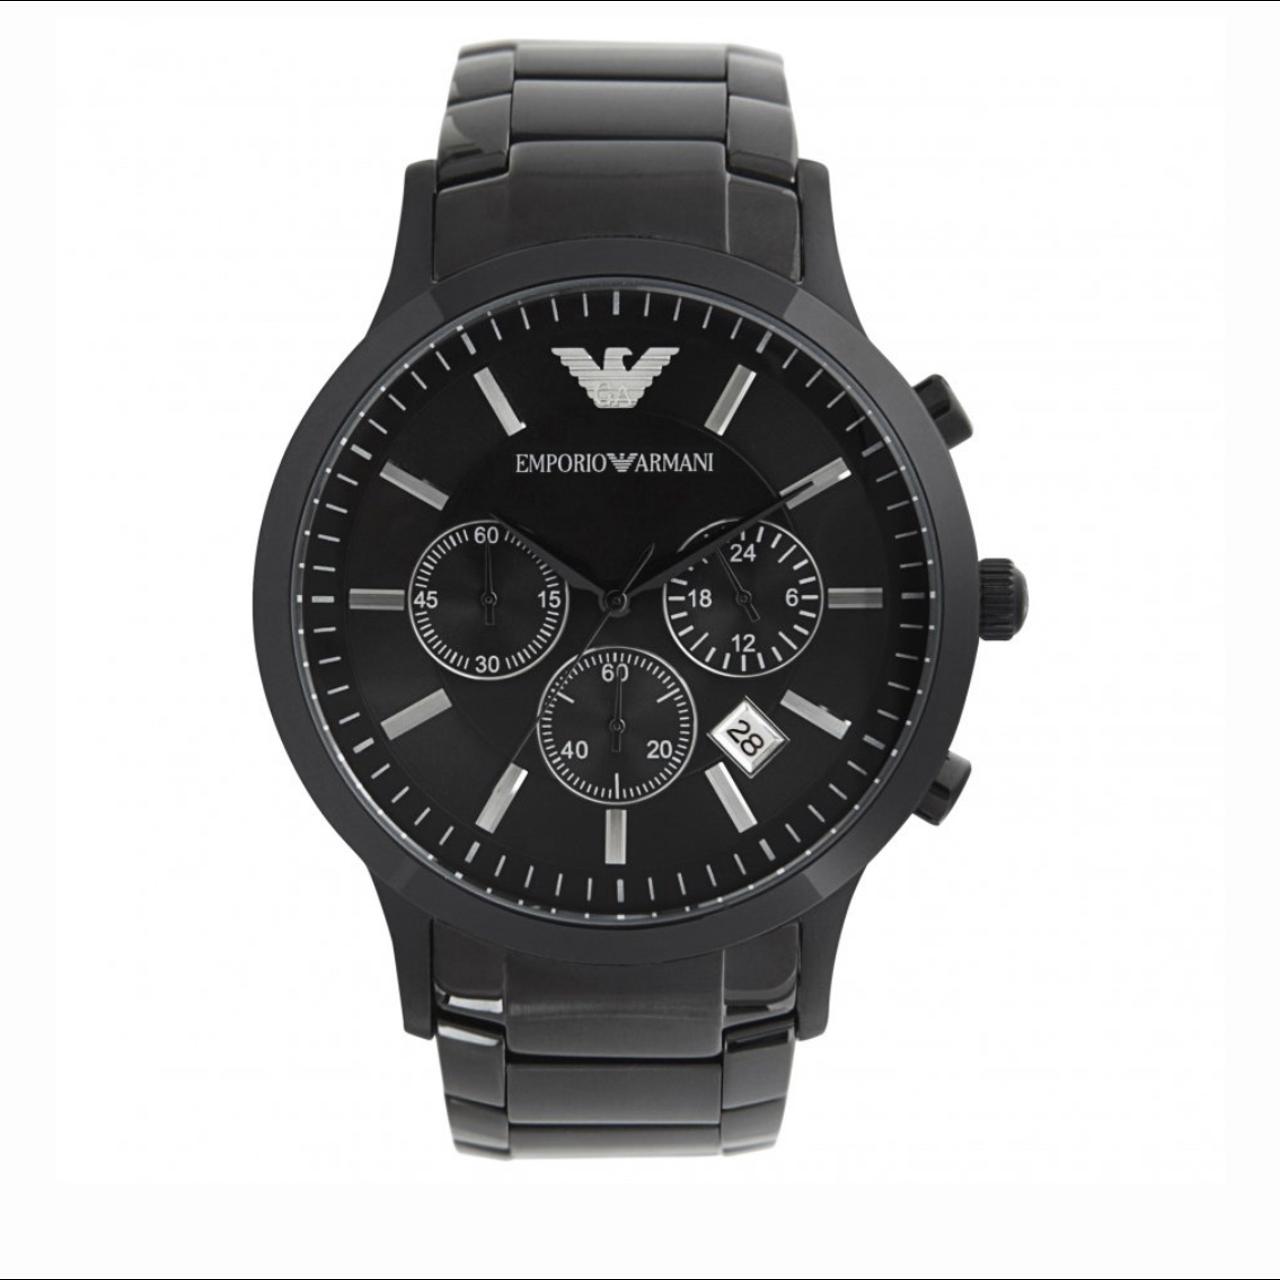 The Emporio Armani AR2453 watch All black with... - Depop